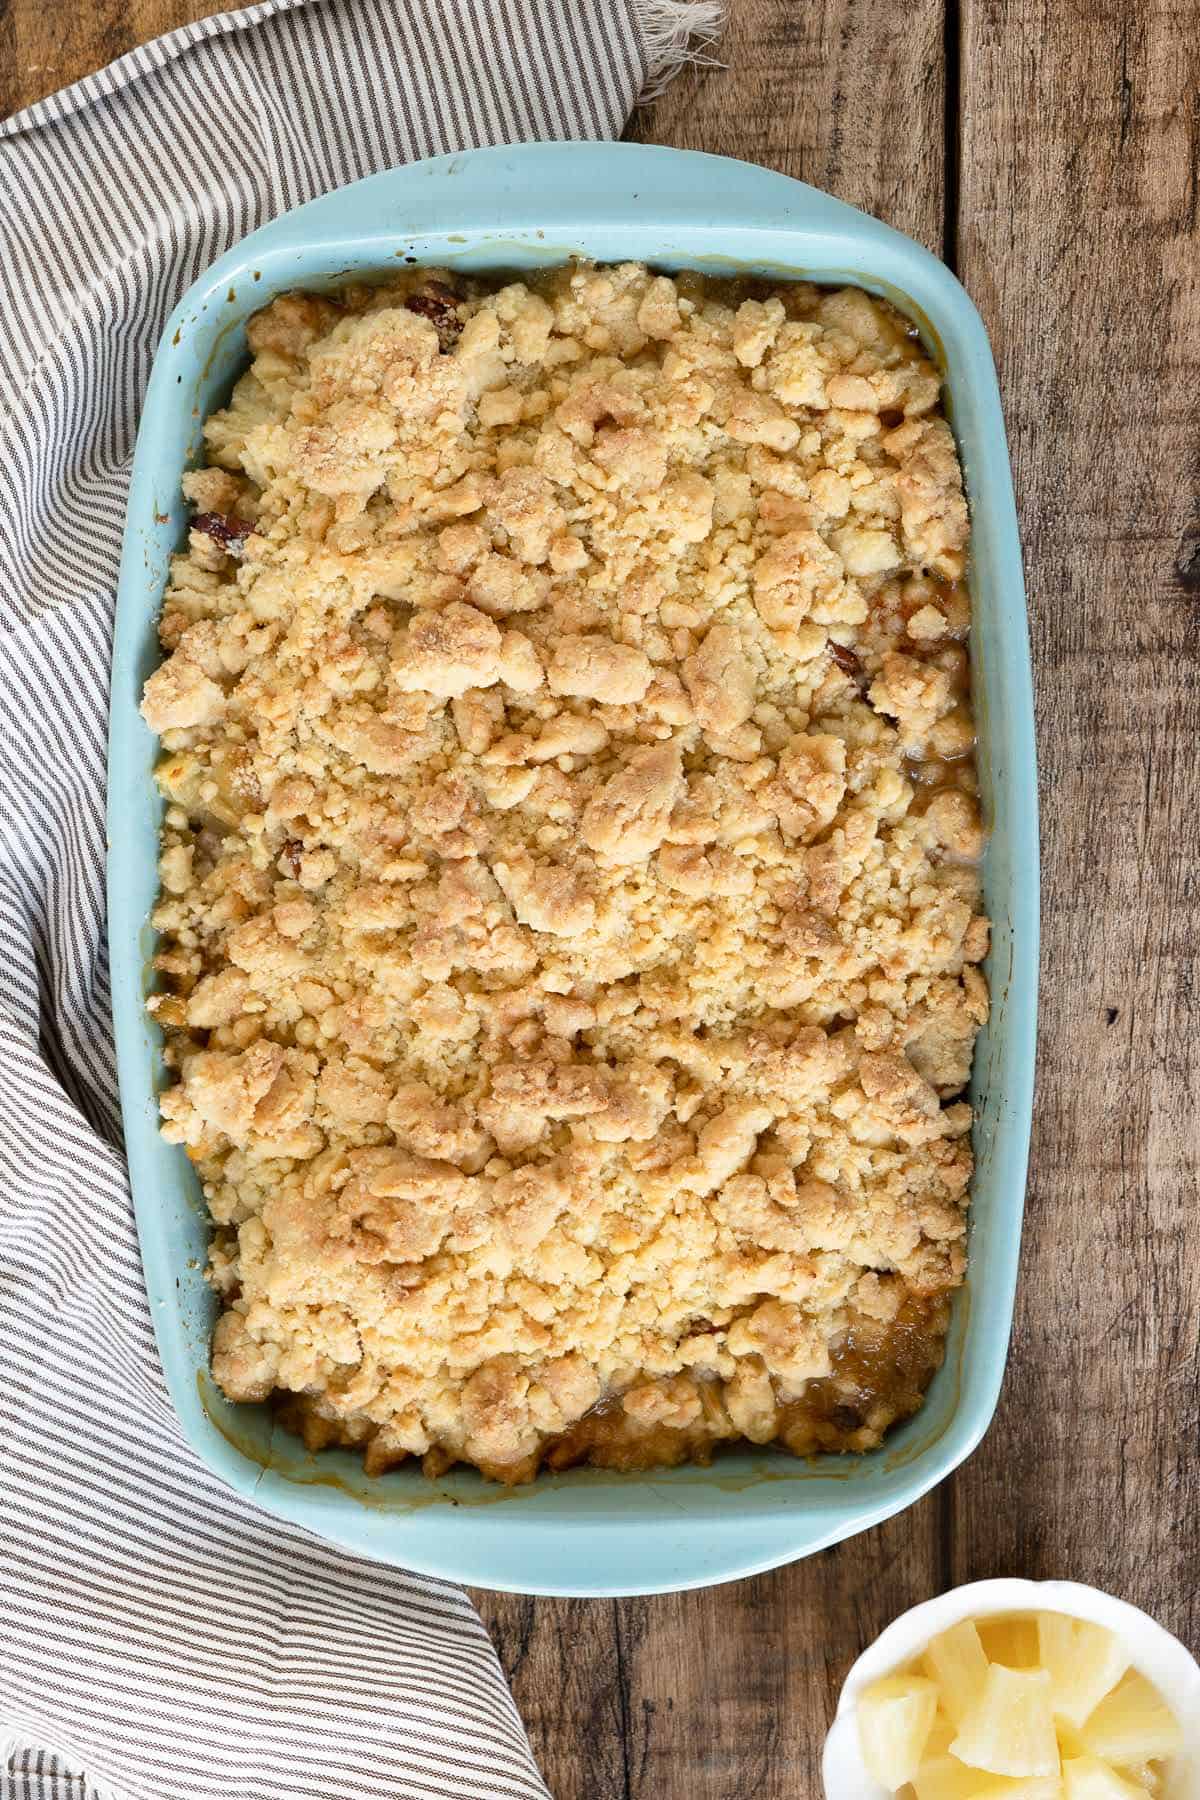 Baked pineapple dump cake in a rectangular blue baking dish. Wooden surface and striped cloth.